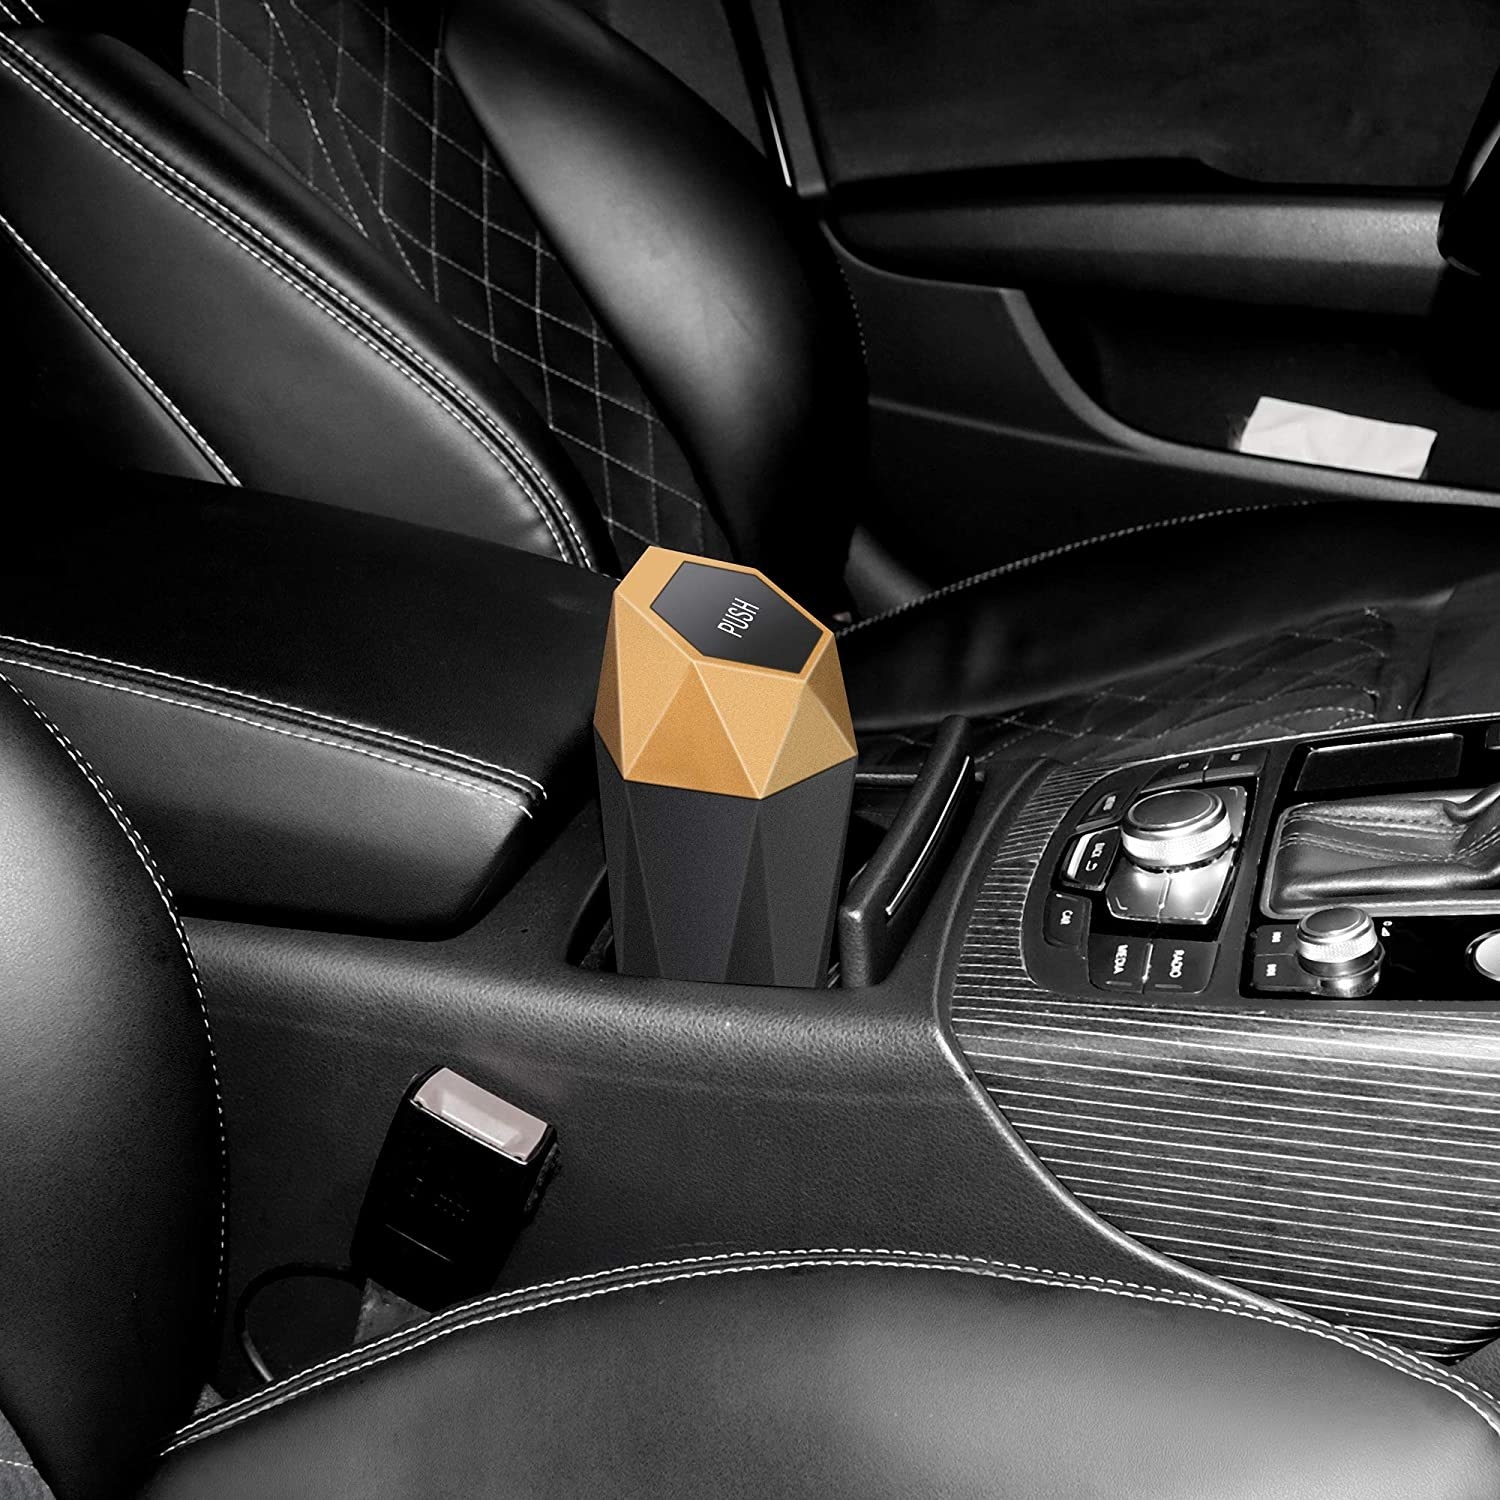 The mini trash can with geometric design sitting in the car&#x27;s cup holders 